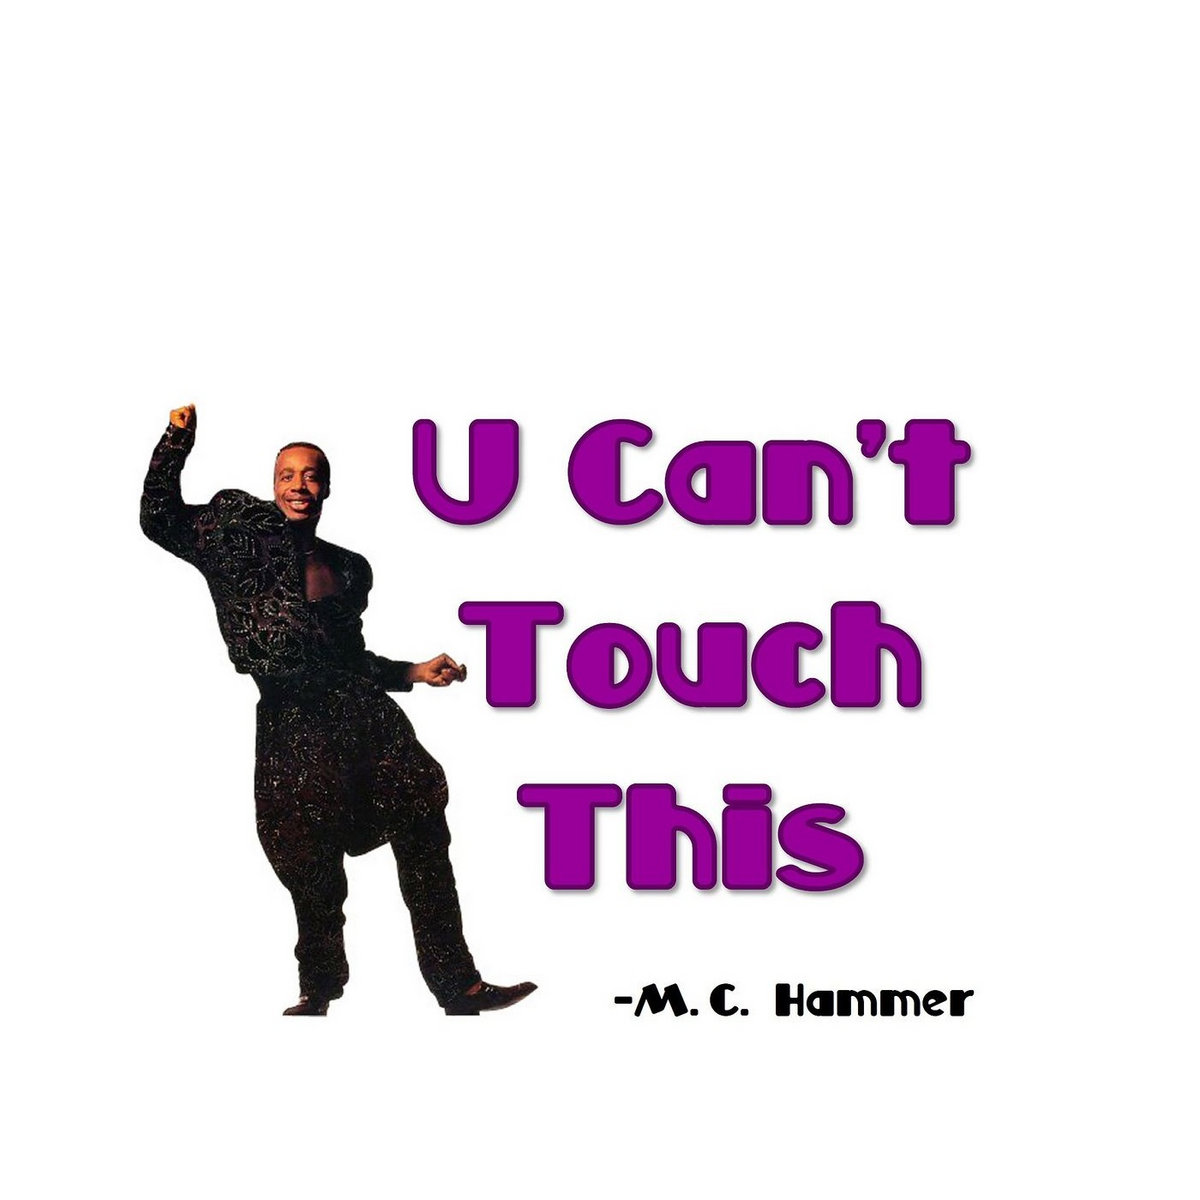 MC Хаммер u can. Can't Touch this. MC Hammer can't Touch this. U cant Touch this- MC Hammer.